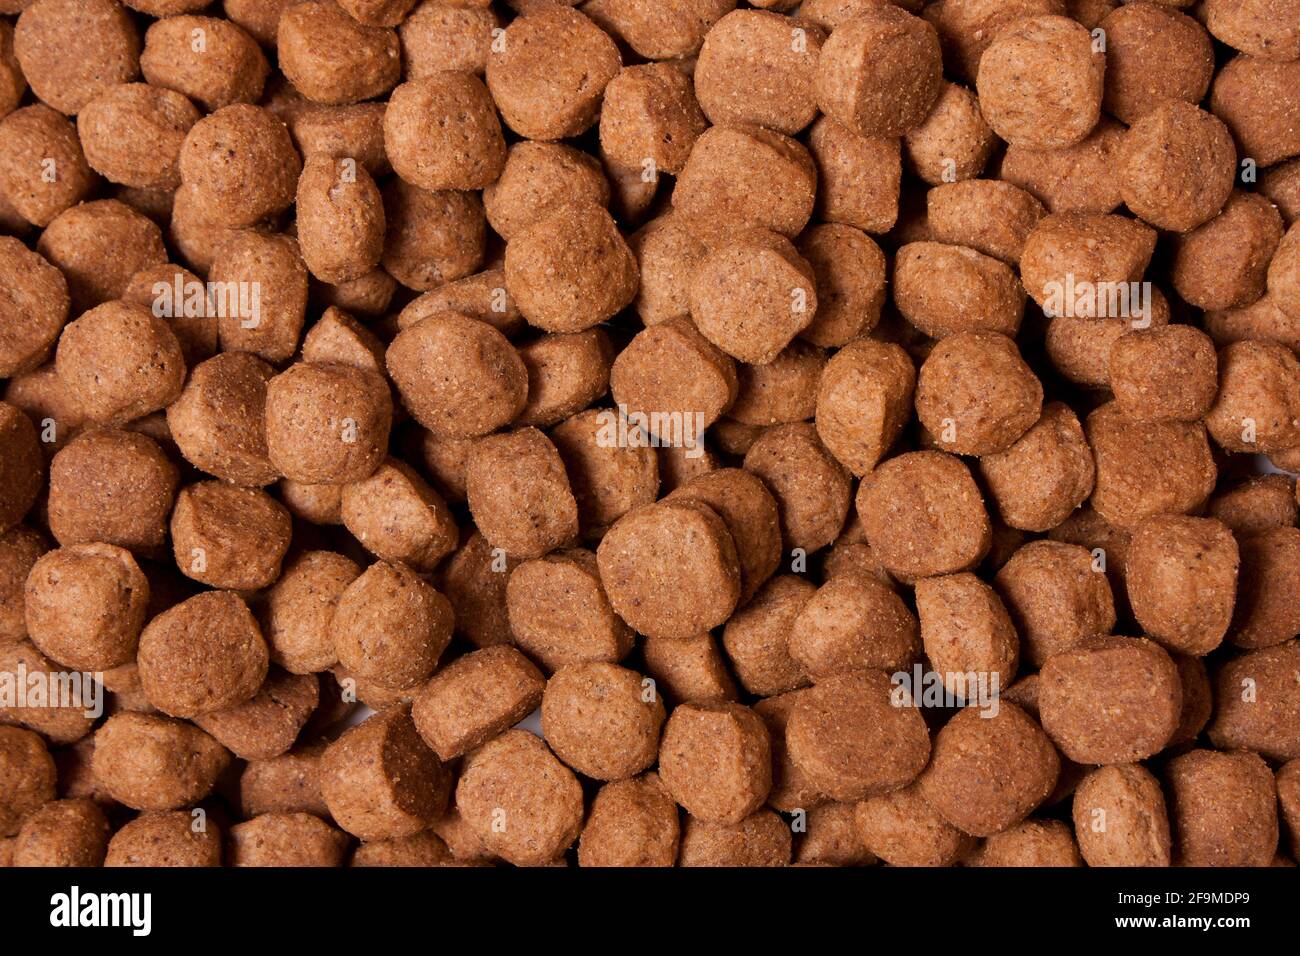 Dog Kibble spread over a background Stock Photo